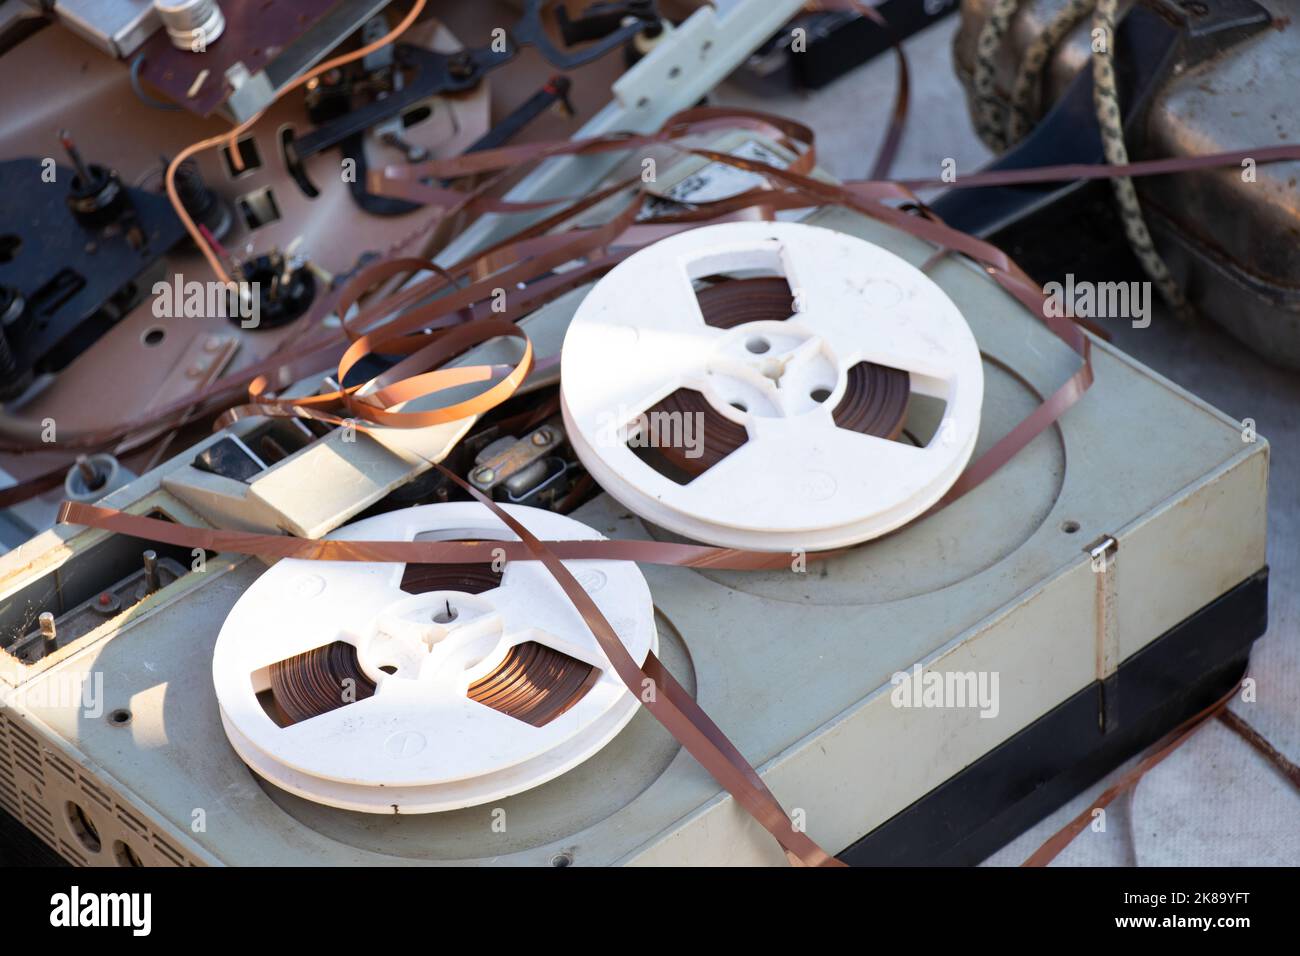 Old film tape recorder, Reel-to-reel tape recorders and reels Stock Photo